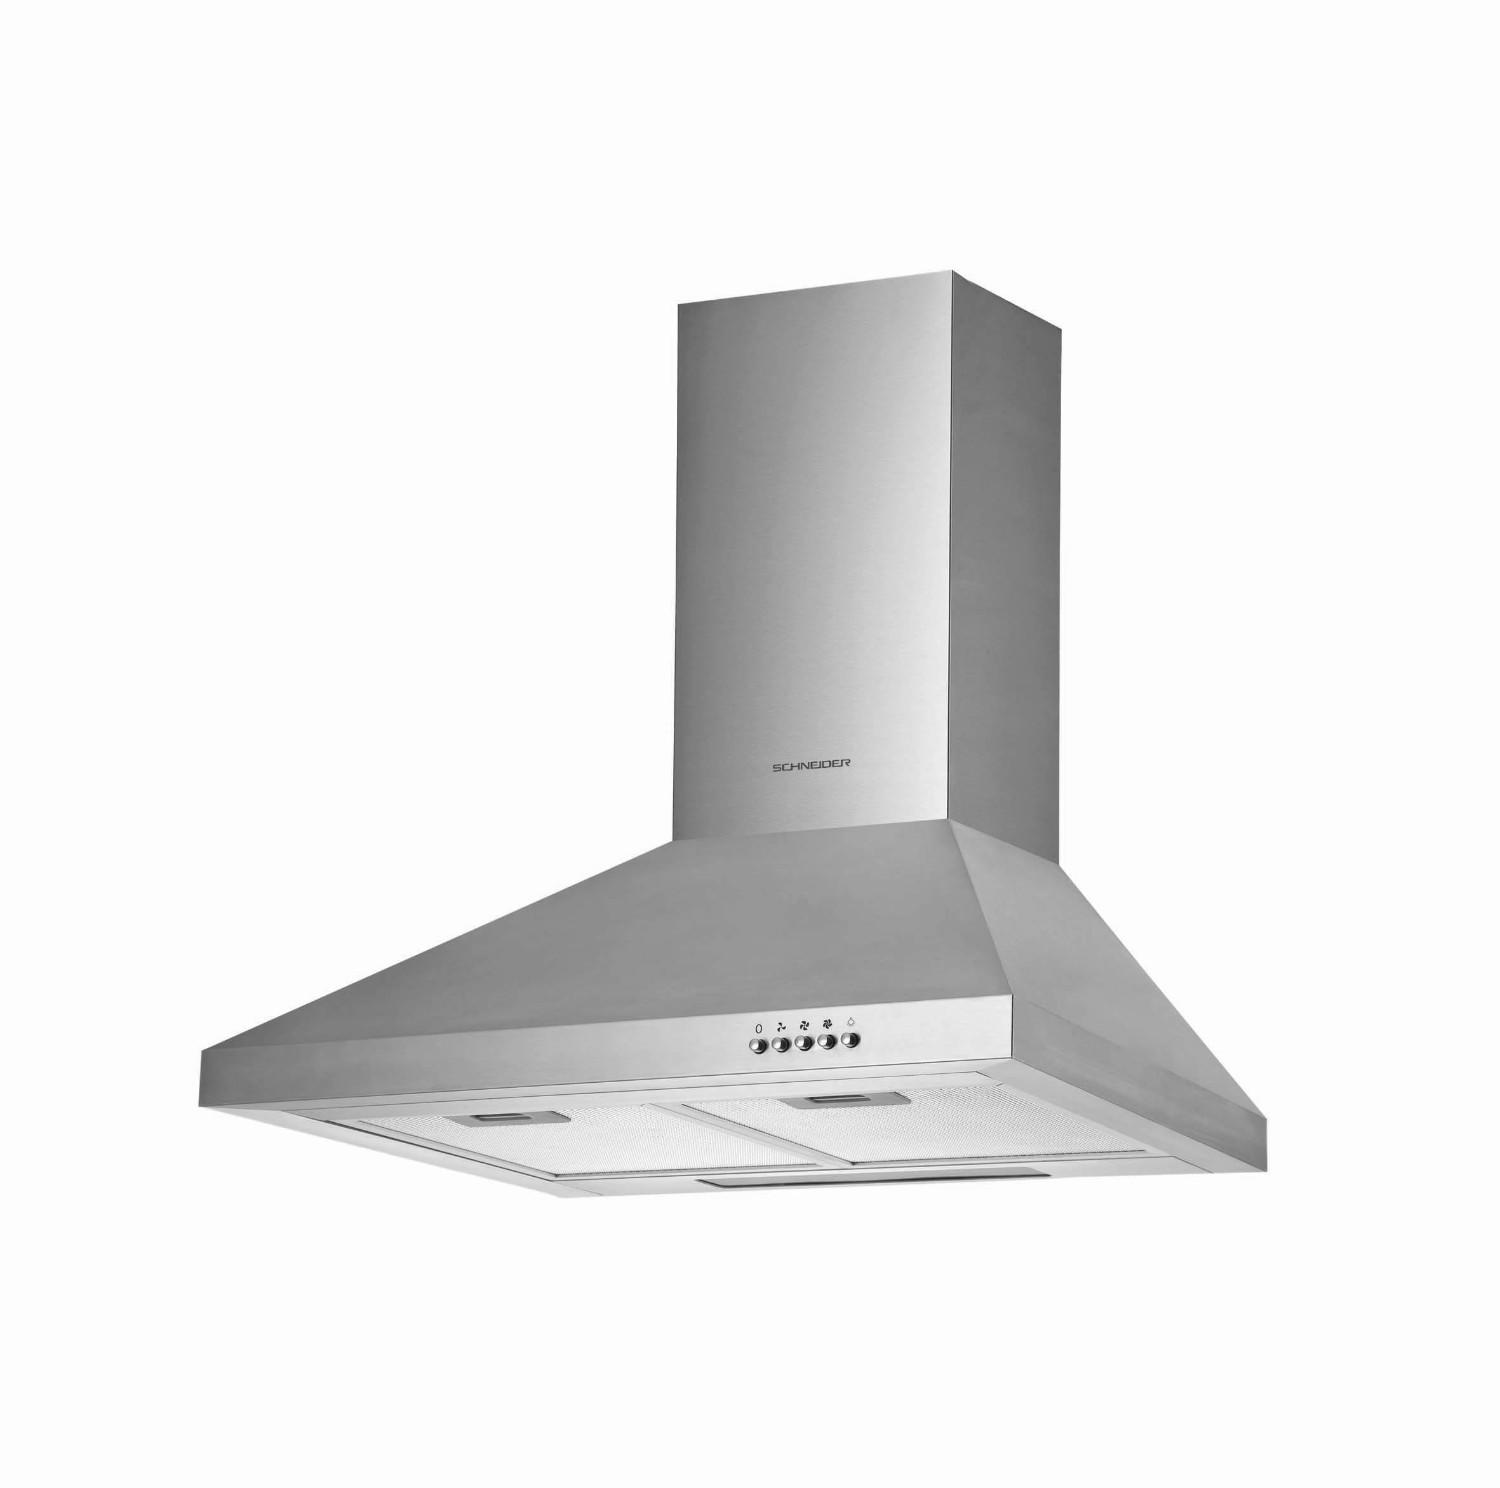 Pyramid wall-mounted extraction hood 60 cm - Schneider